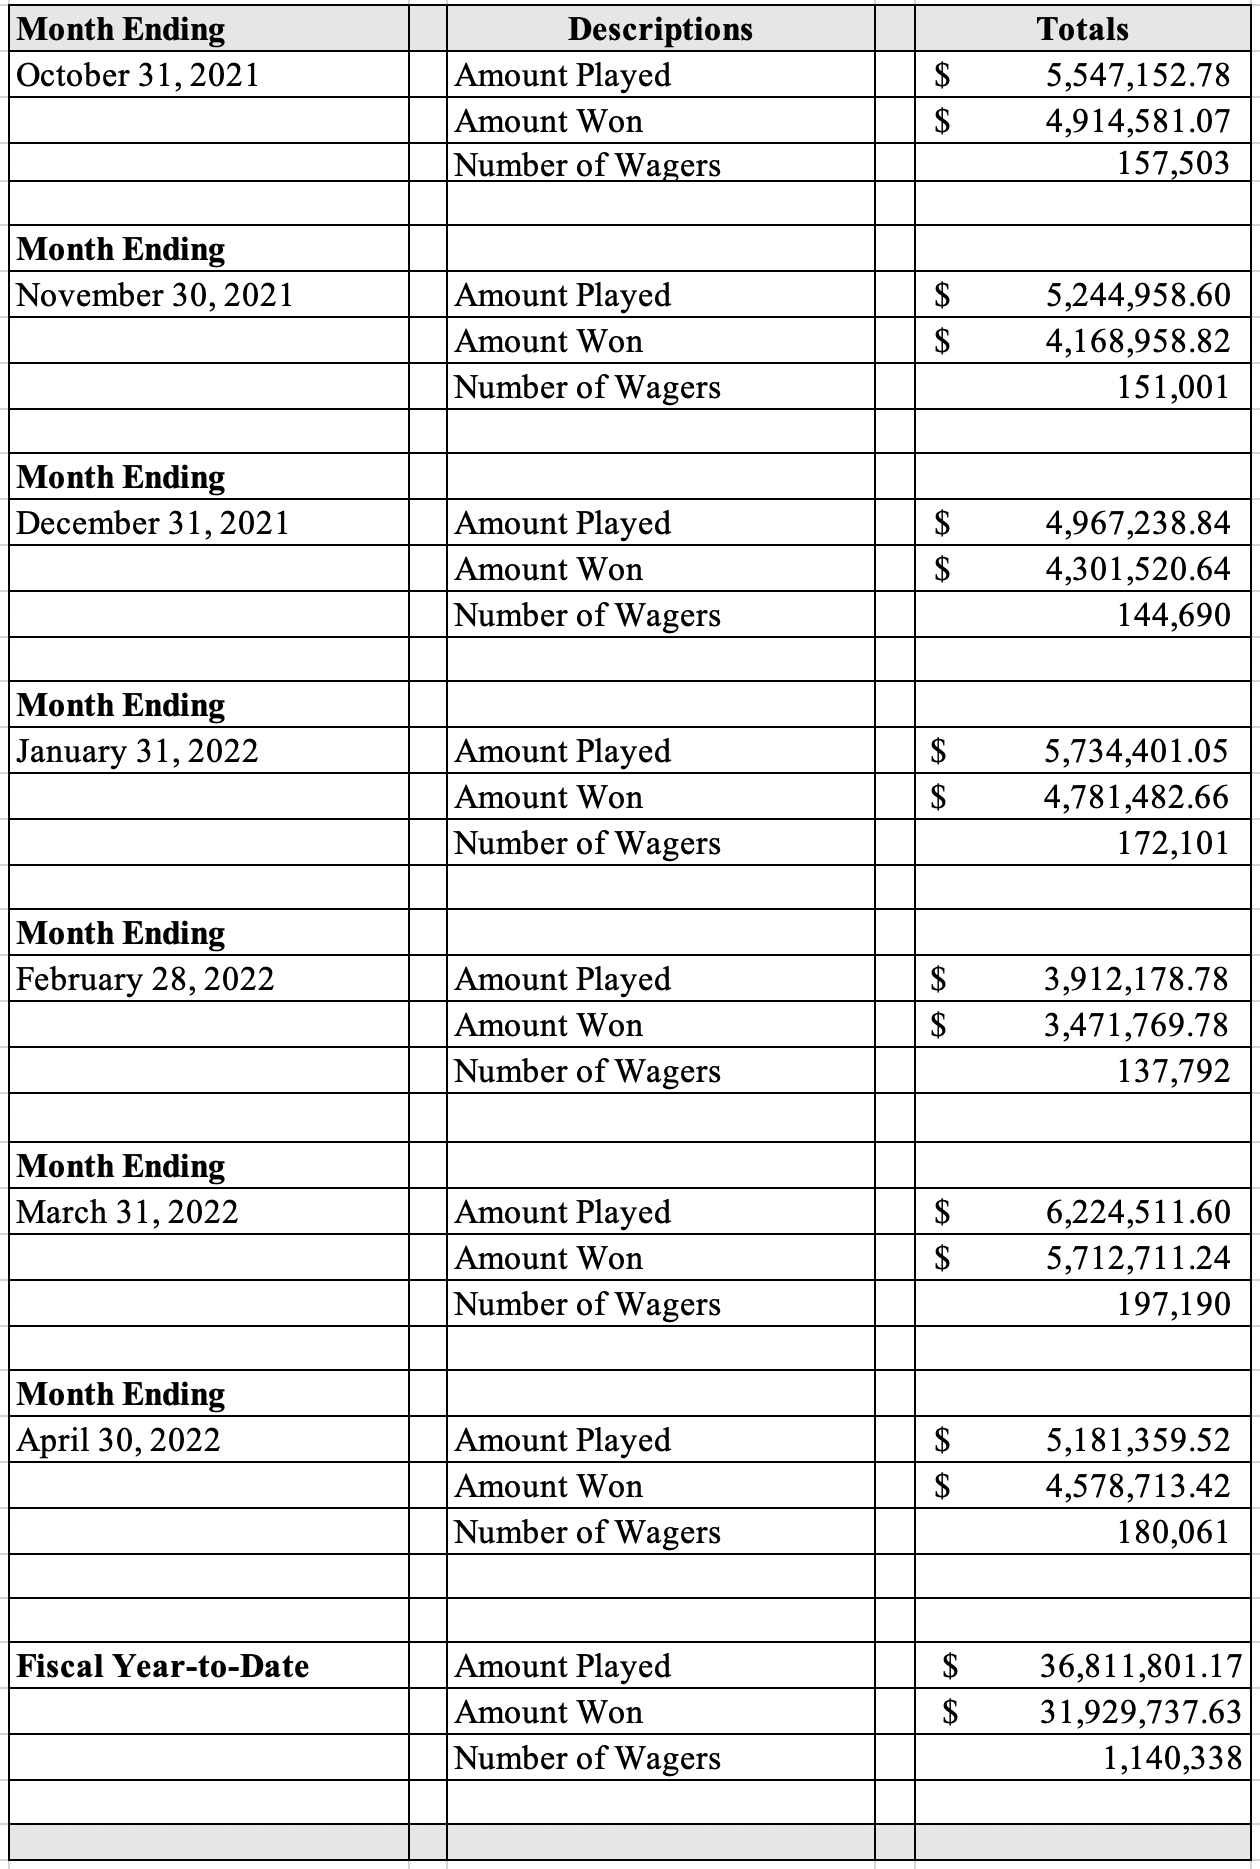 Table displaying the April 2022 Sports Wagering monthly revenue totals